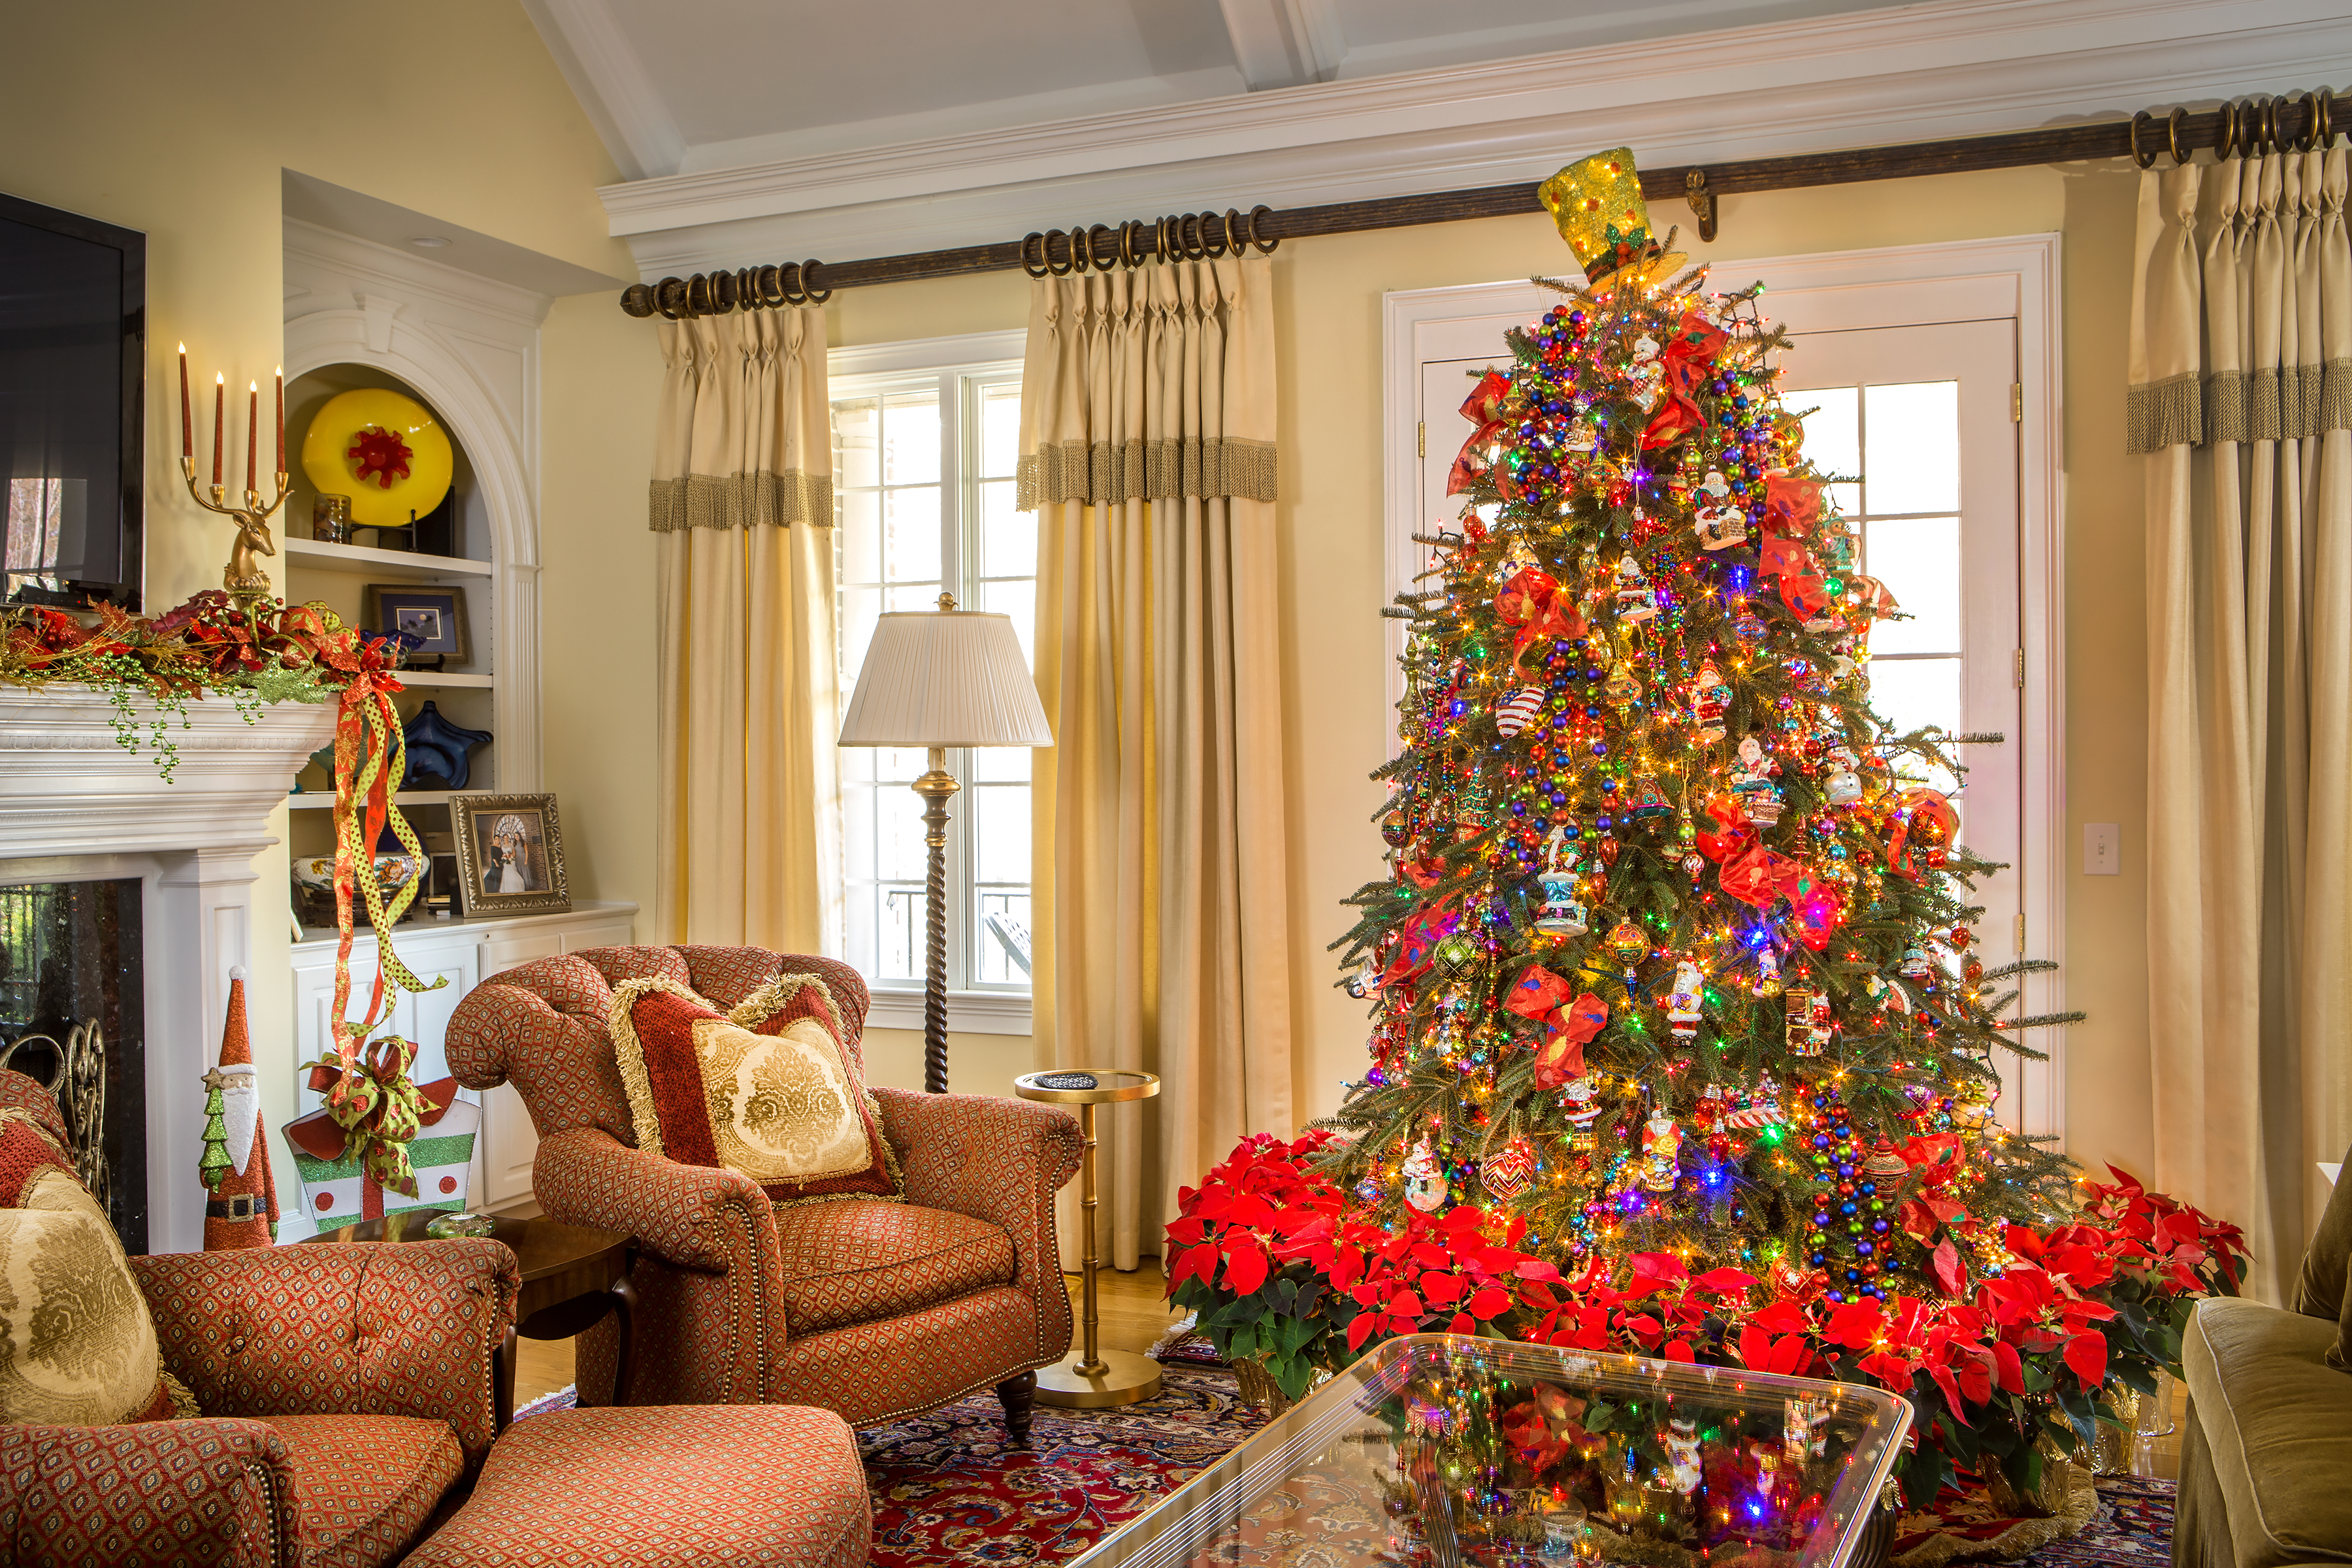 Donna Strom’s home is blessed to have floral artistChad Ridenour decorate for the Christmas season. Her glorious tree is centered in her living room by the fireplace with all new glass ornaments, acquired since the 2015 flood, mostly made by Mark Roberts and Christopher Radko. The skillfully handcrafted, collectable Radkos are Polish-made, featuring favorite Christmas symbols and exclusive Radko themes. Mark Roberts’ ornaments are complementary collectible jewels that sparkle and shine. This year the tree features blinking lights for the first time and a ring of red poinsettias around the base of the tree, both added by Chad. 